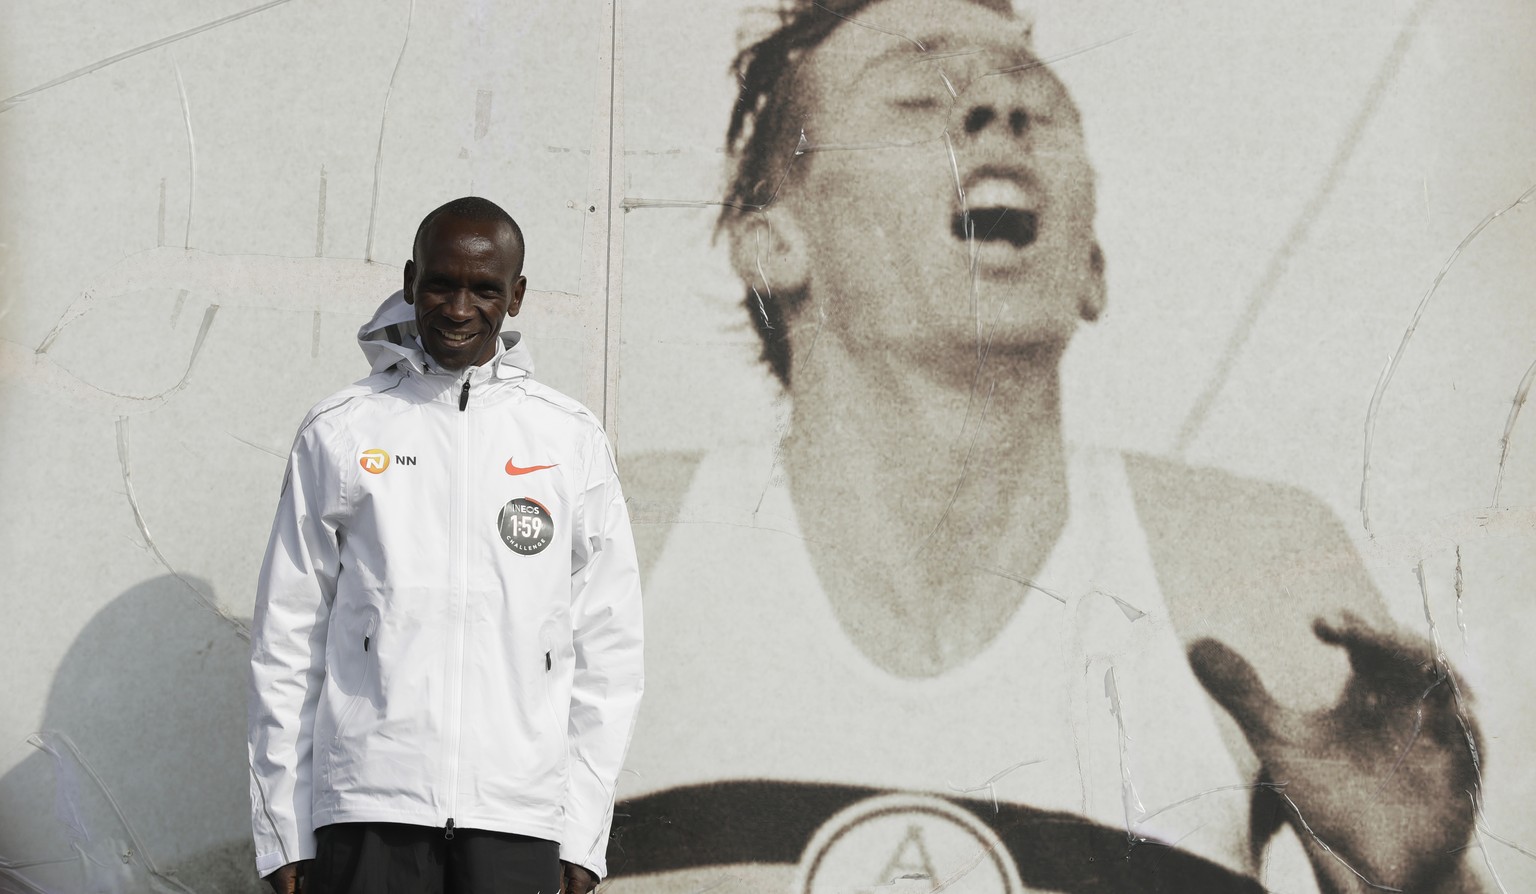 Marathon world record holder Kenya&#039;s Eliud Kipchoge poses for photographers next to an image of British athlete Roger Bannister, who in 1954 ran to become the first person ever to break the four  ...